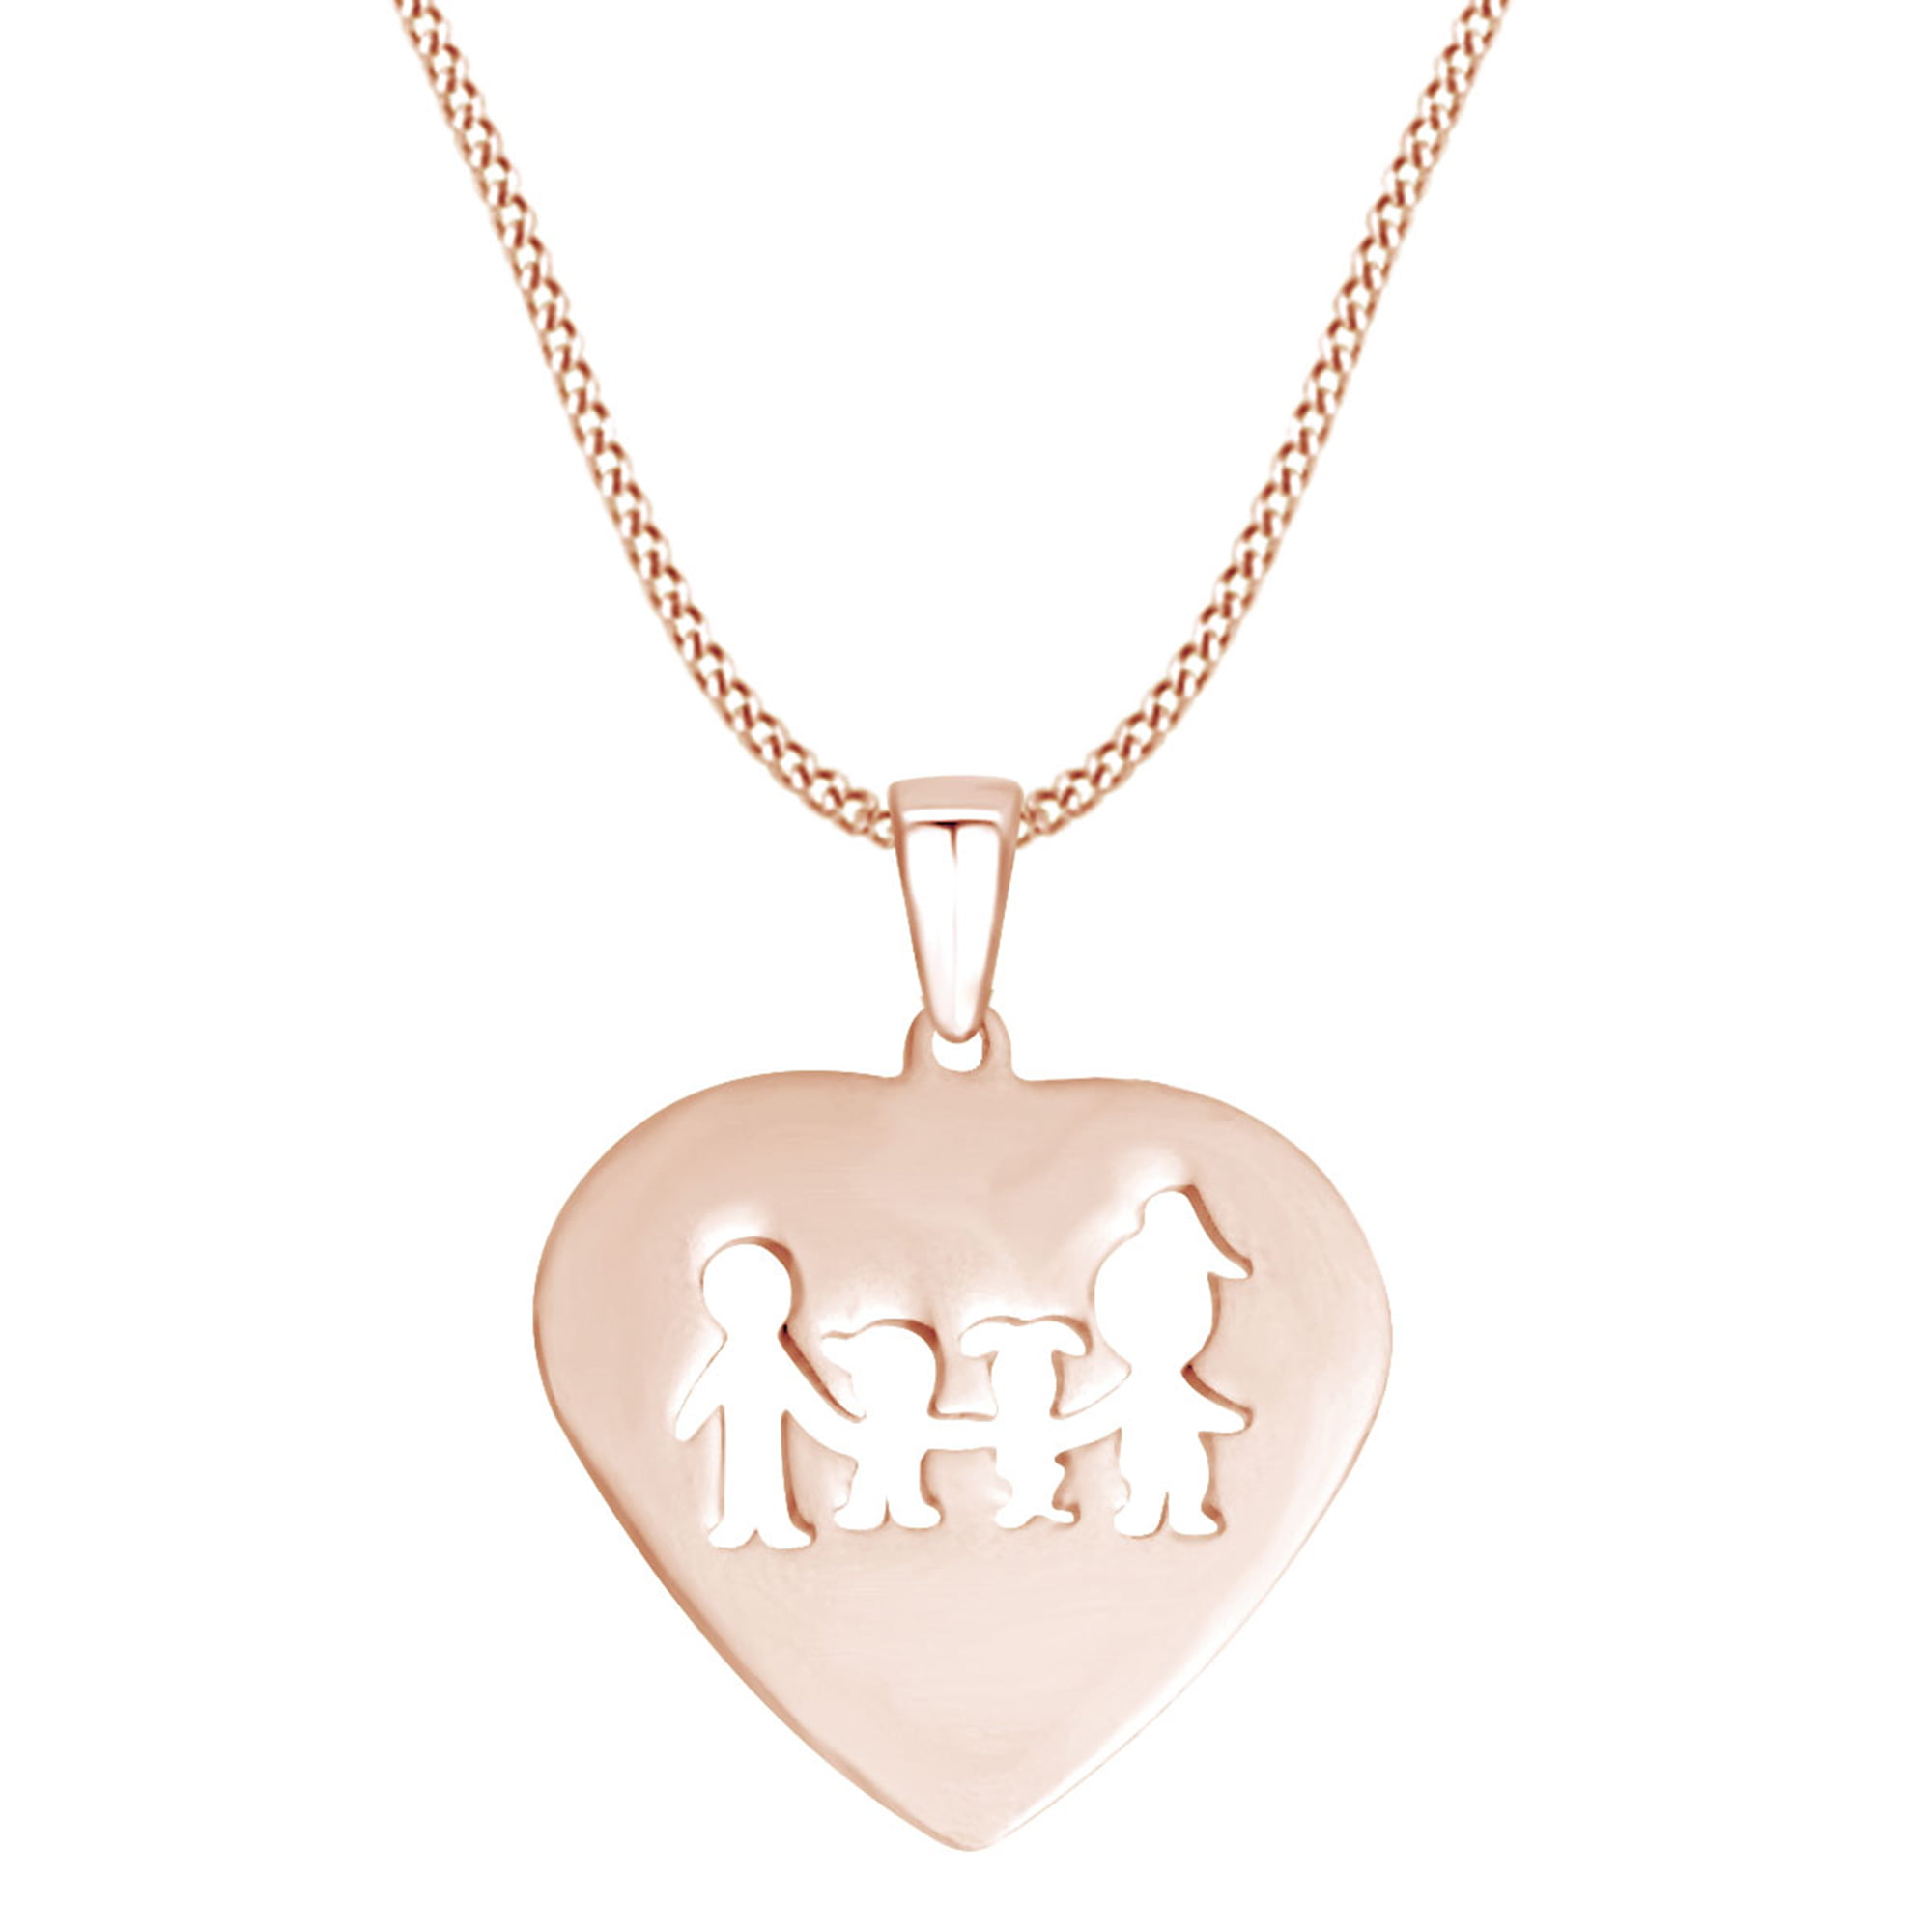 Mother s Day Jewelry Gifts Parents Son and Daughter Heart Pendant Necklace In 14k Rose Gold Over Sterling Silver de3bb0be 928d 4b54 b6be 88fe0a6ce14a 1.10c31a6a2ac2330538c8c4e31d9d1a56